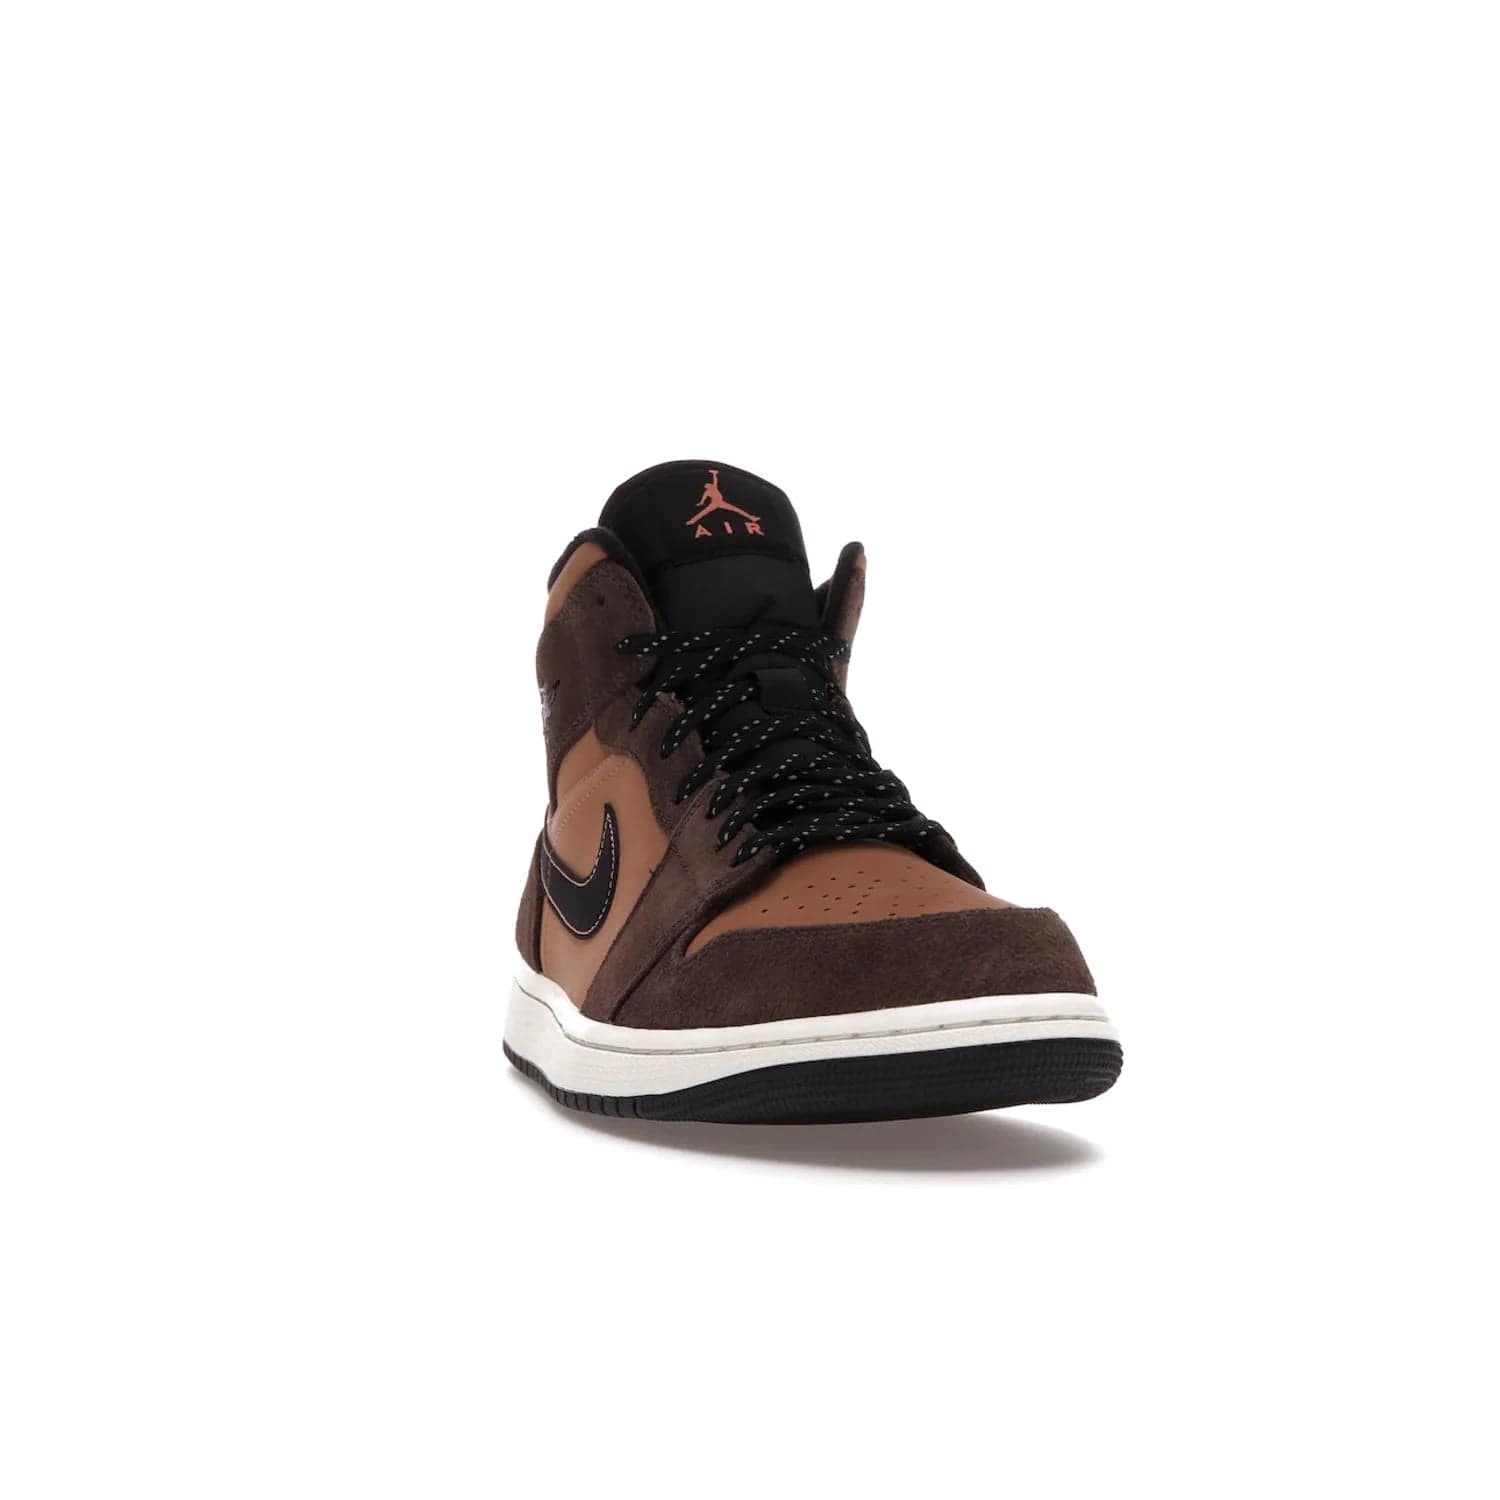 Jordan 1 Mid SE Dark Chocolate - Image 8 - Only at www.BallersClubKickz.com - This fashionable and functional Jordan 1 Mid SE Dark Chocolate features a light brown Durabuck upper, dark brown suede overlays, black Swoosh logos and reflective patch at heel. A must-have for any sneakerhead!